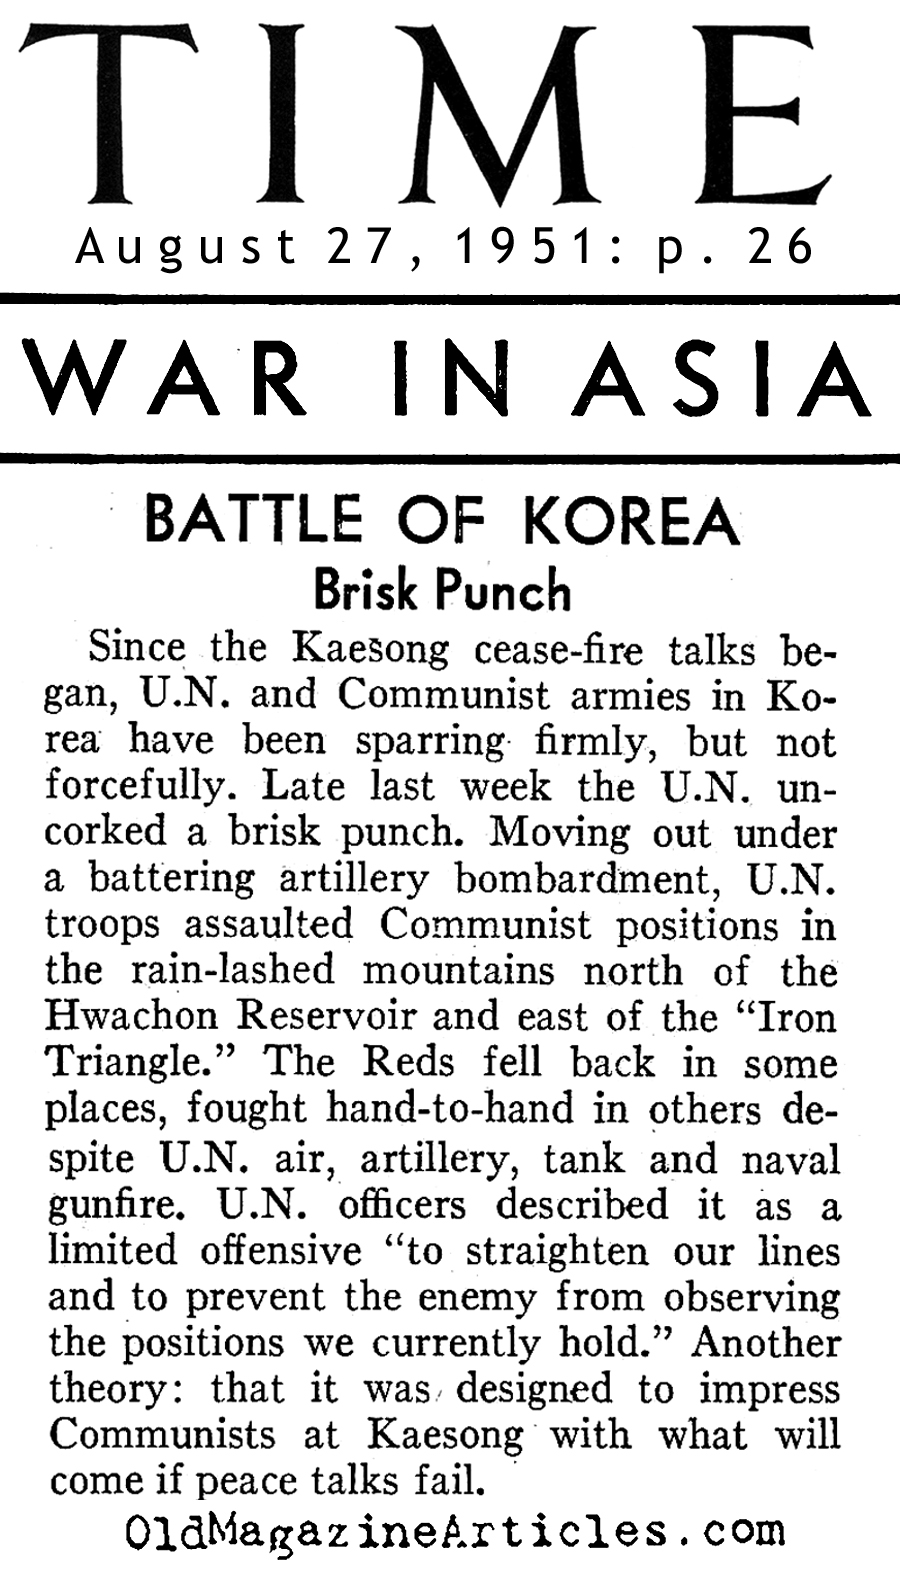 The Kaesong Cease-Fire (Time Magazine, 1951)